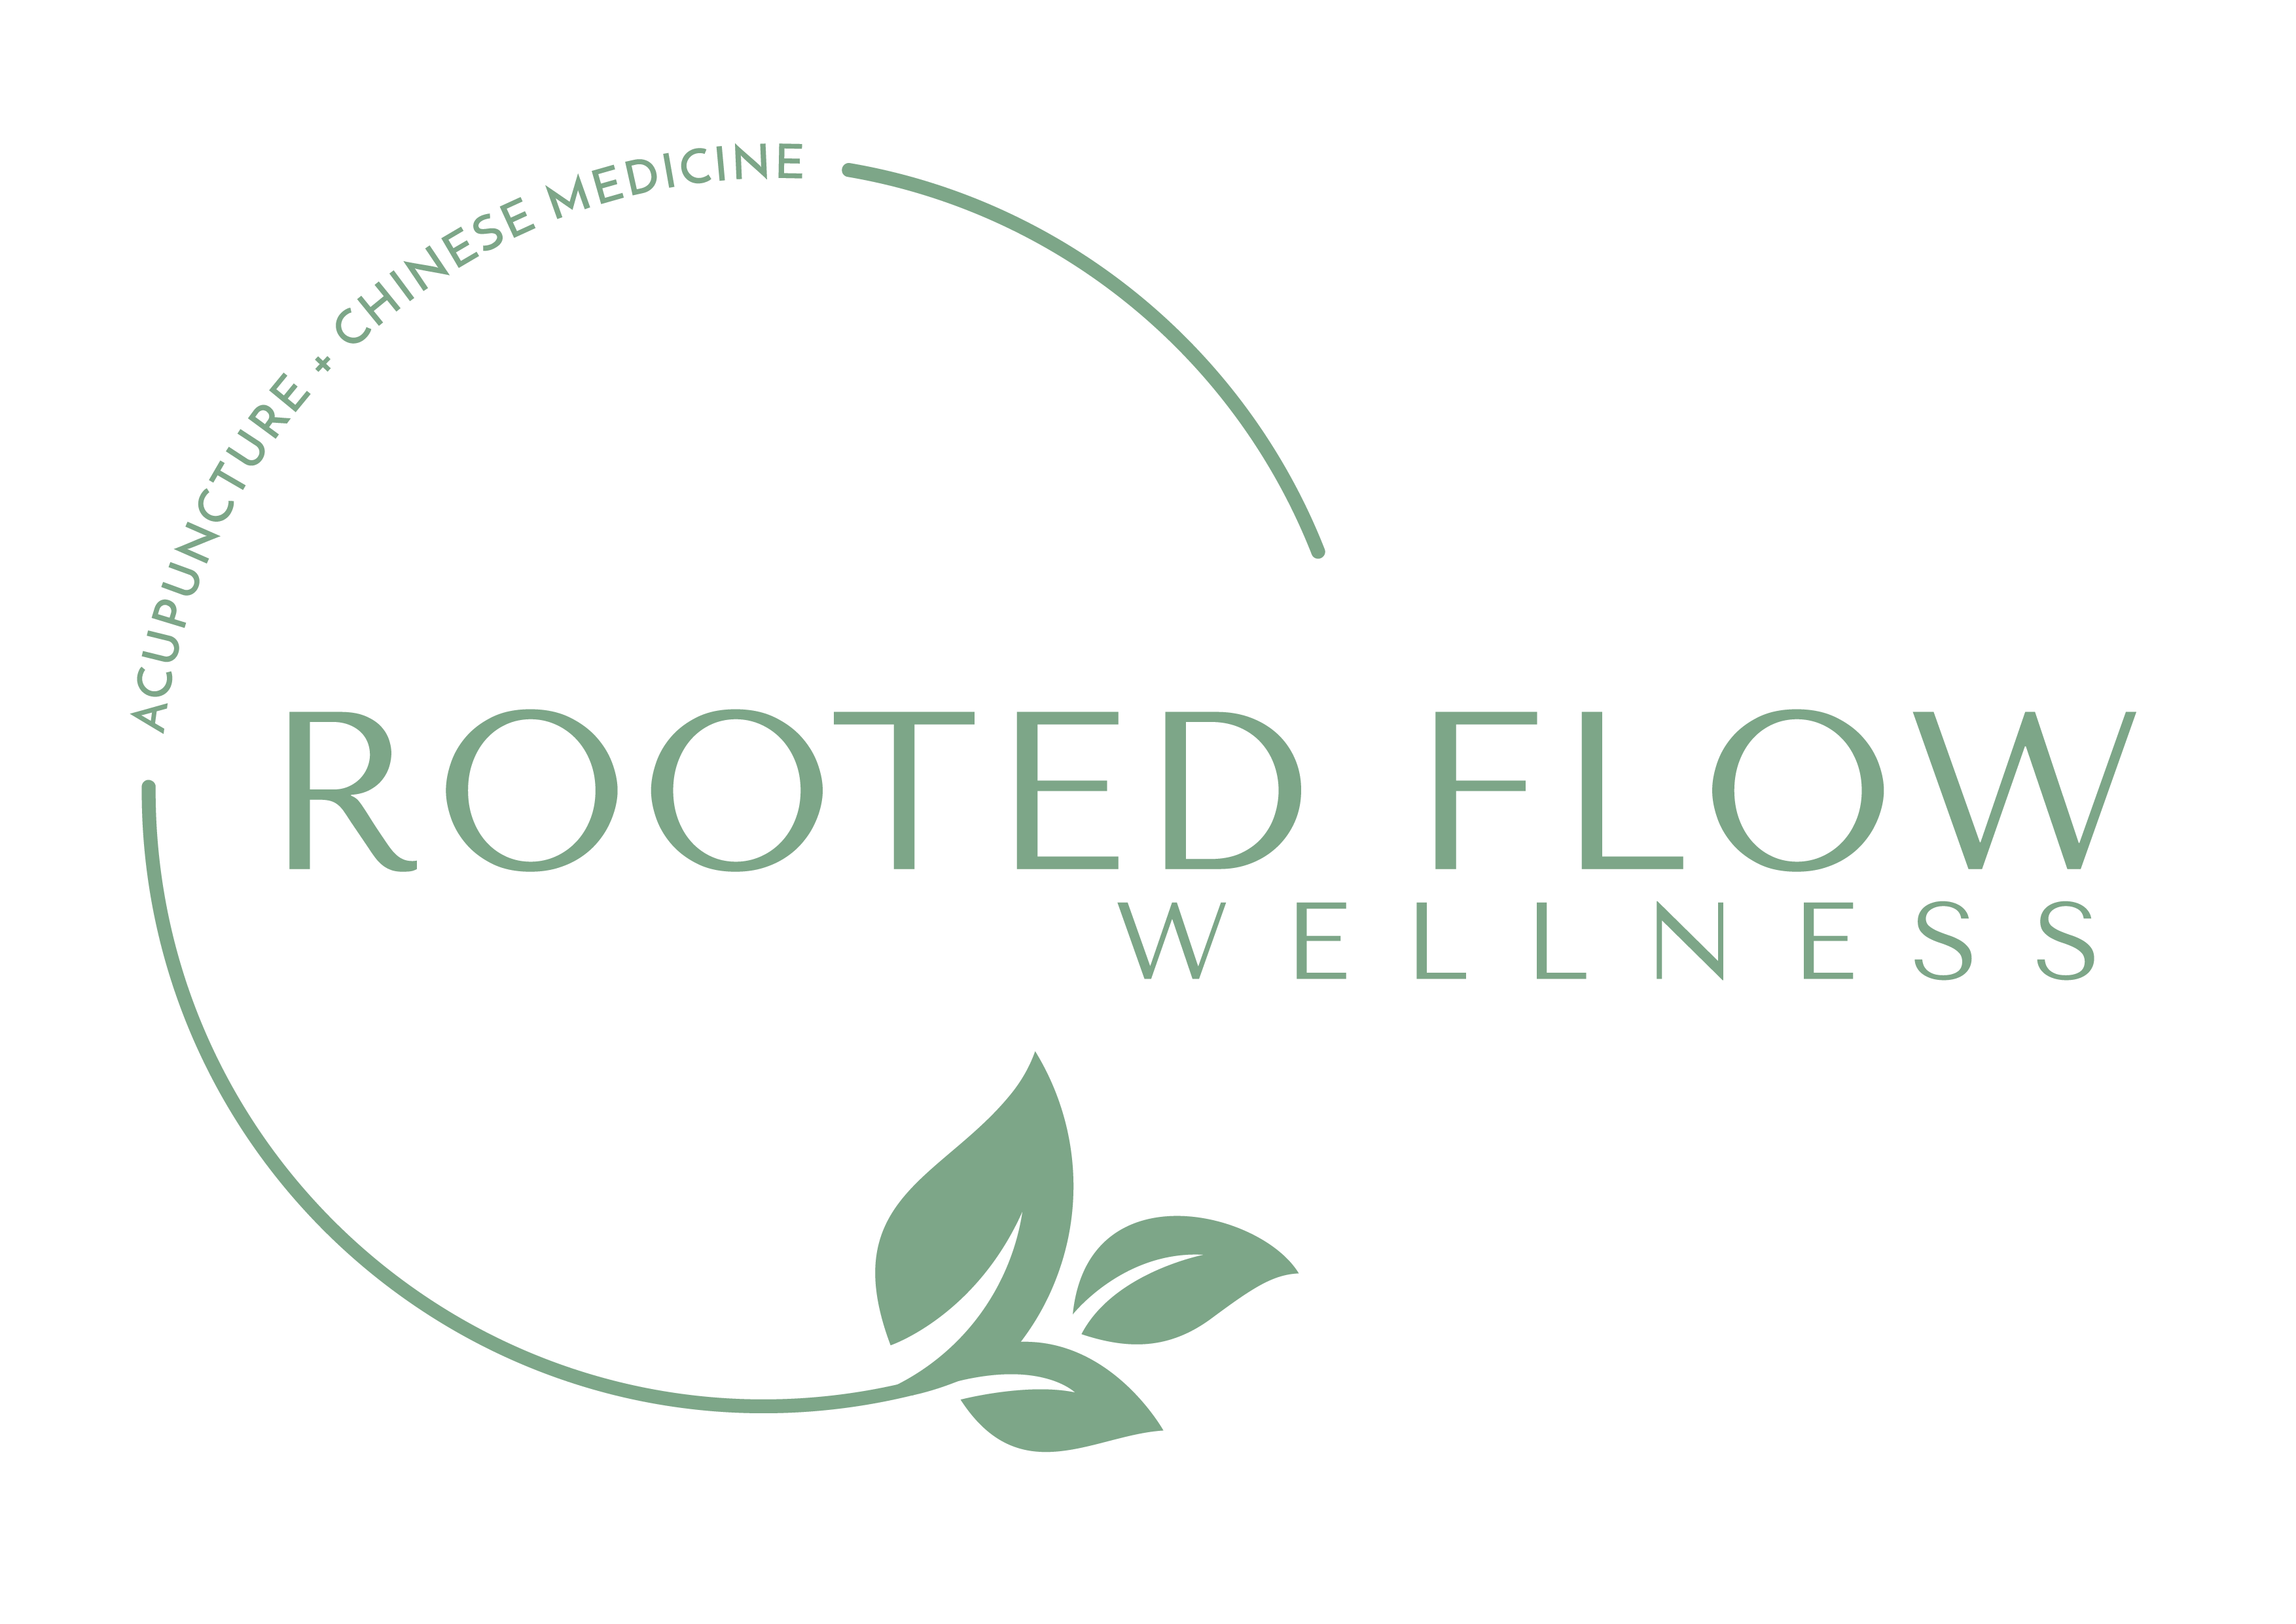 Rooted Flow Wellness